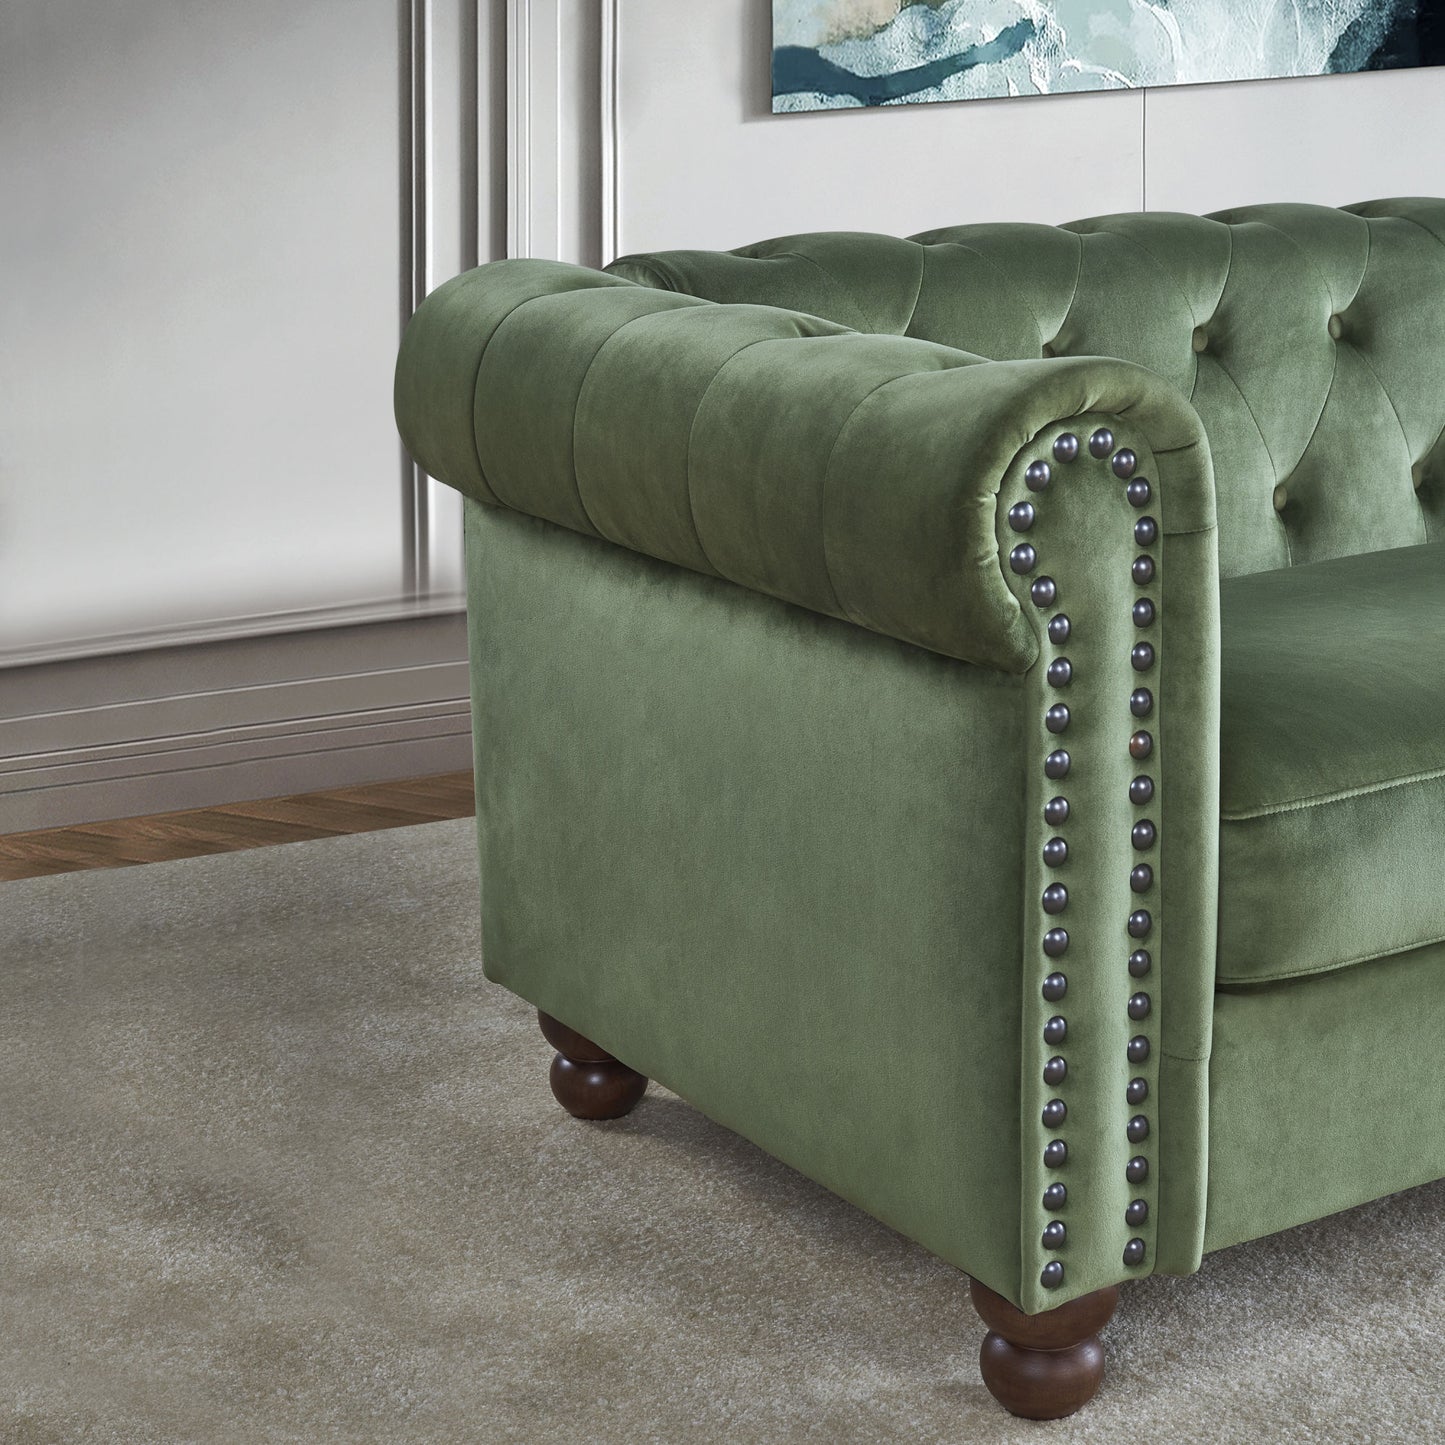 PHOYAL Large Sofa, Velvet Sofa Three-seat Sofa Classic Tufted Chesterfield Settee Sofa Modern 3 Seater Couch Furniture Tufted Back for Living Room (Green)